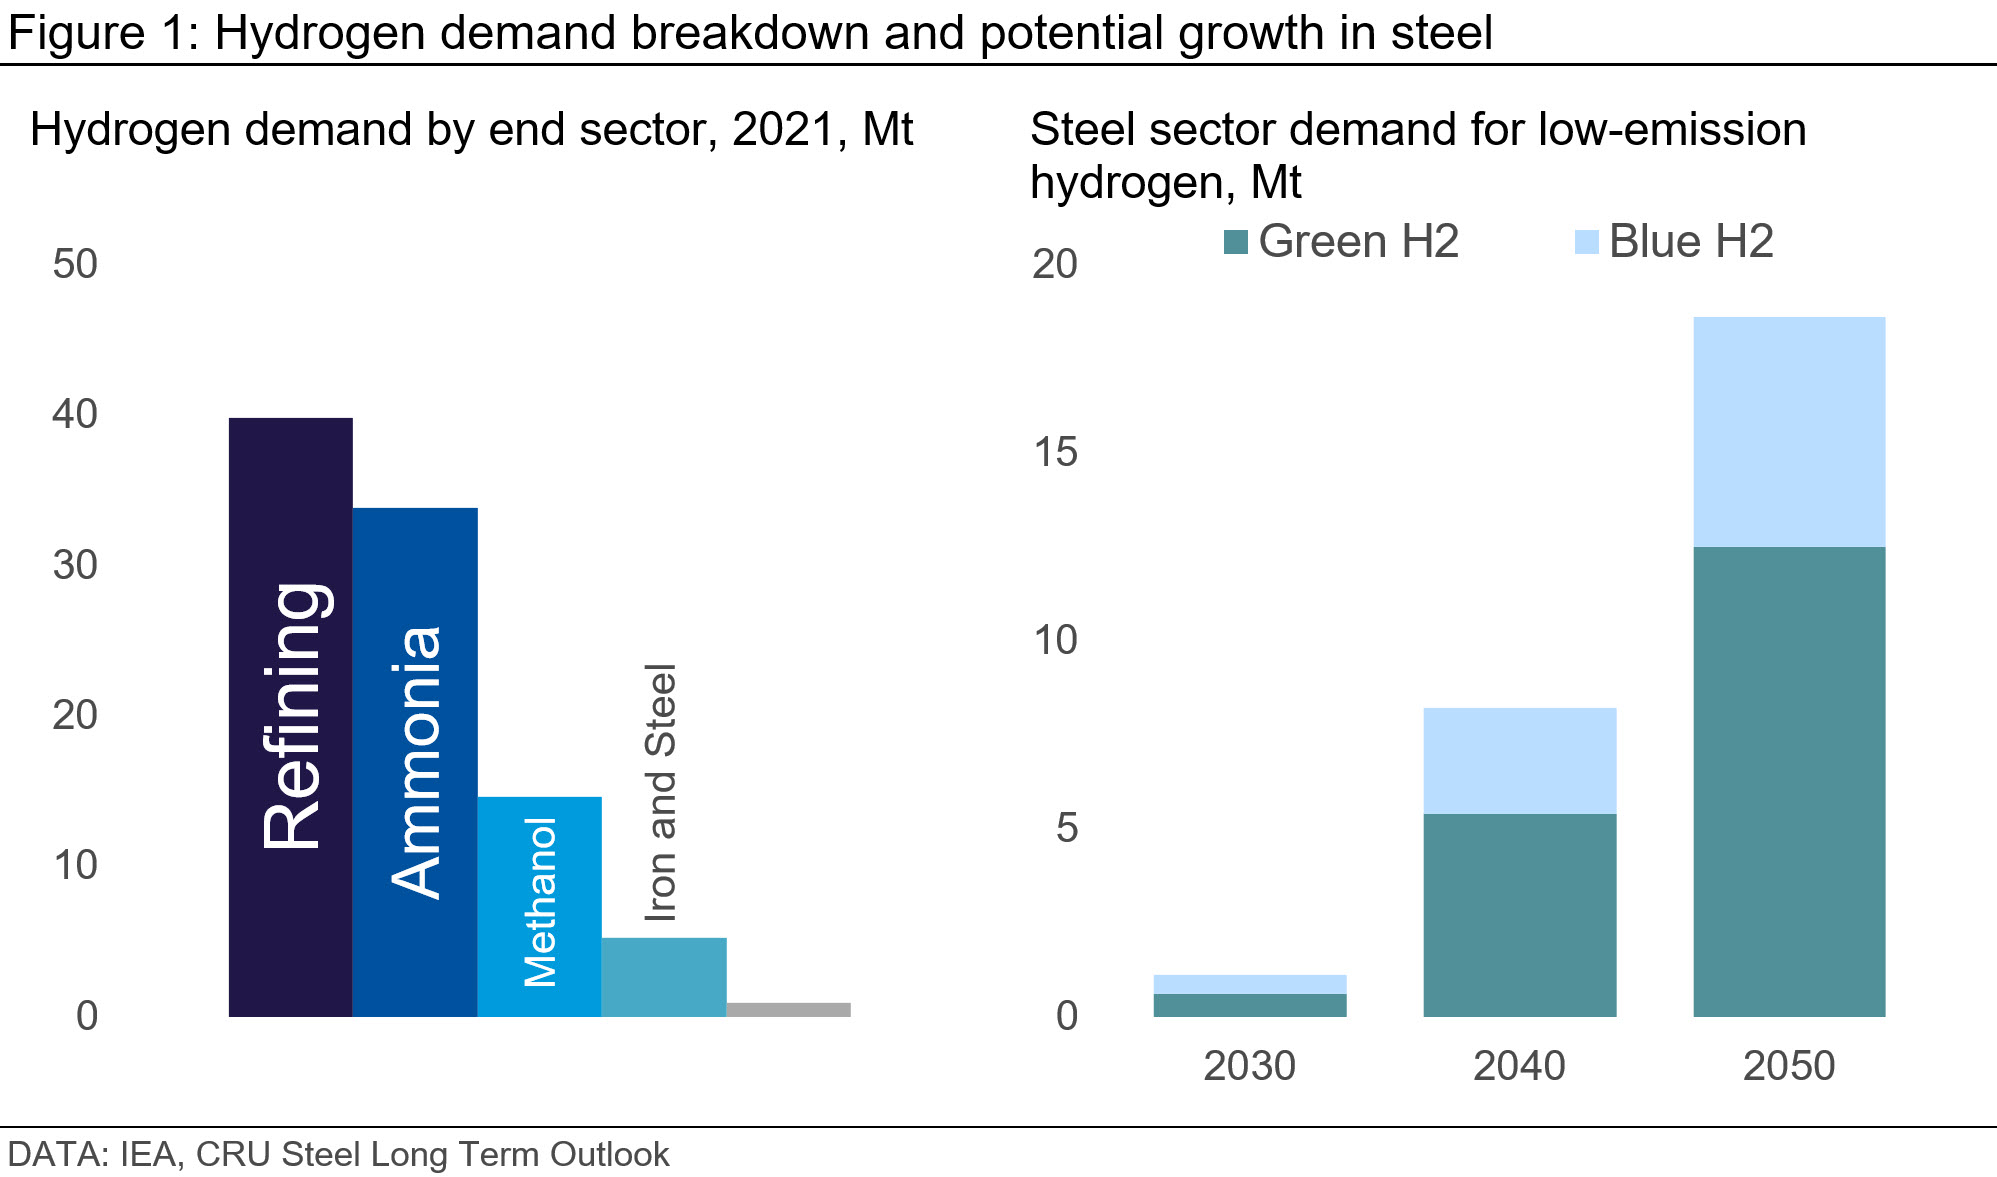 Graph showing the hydrogen demand breakdown and potential growth in steel